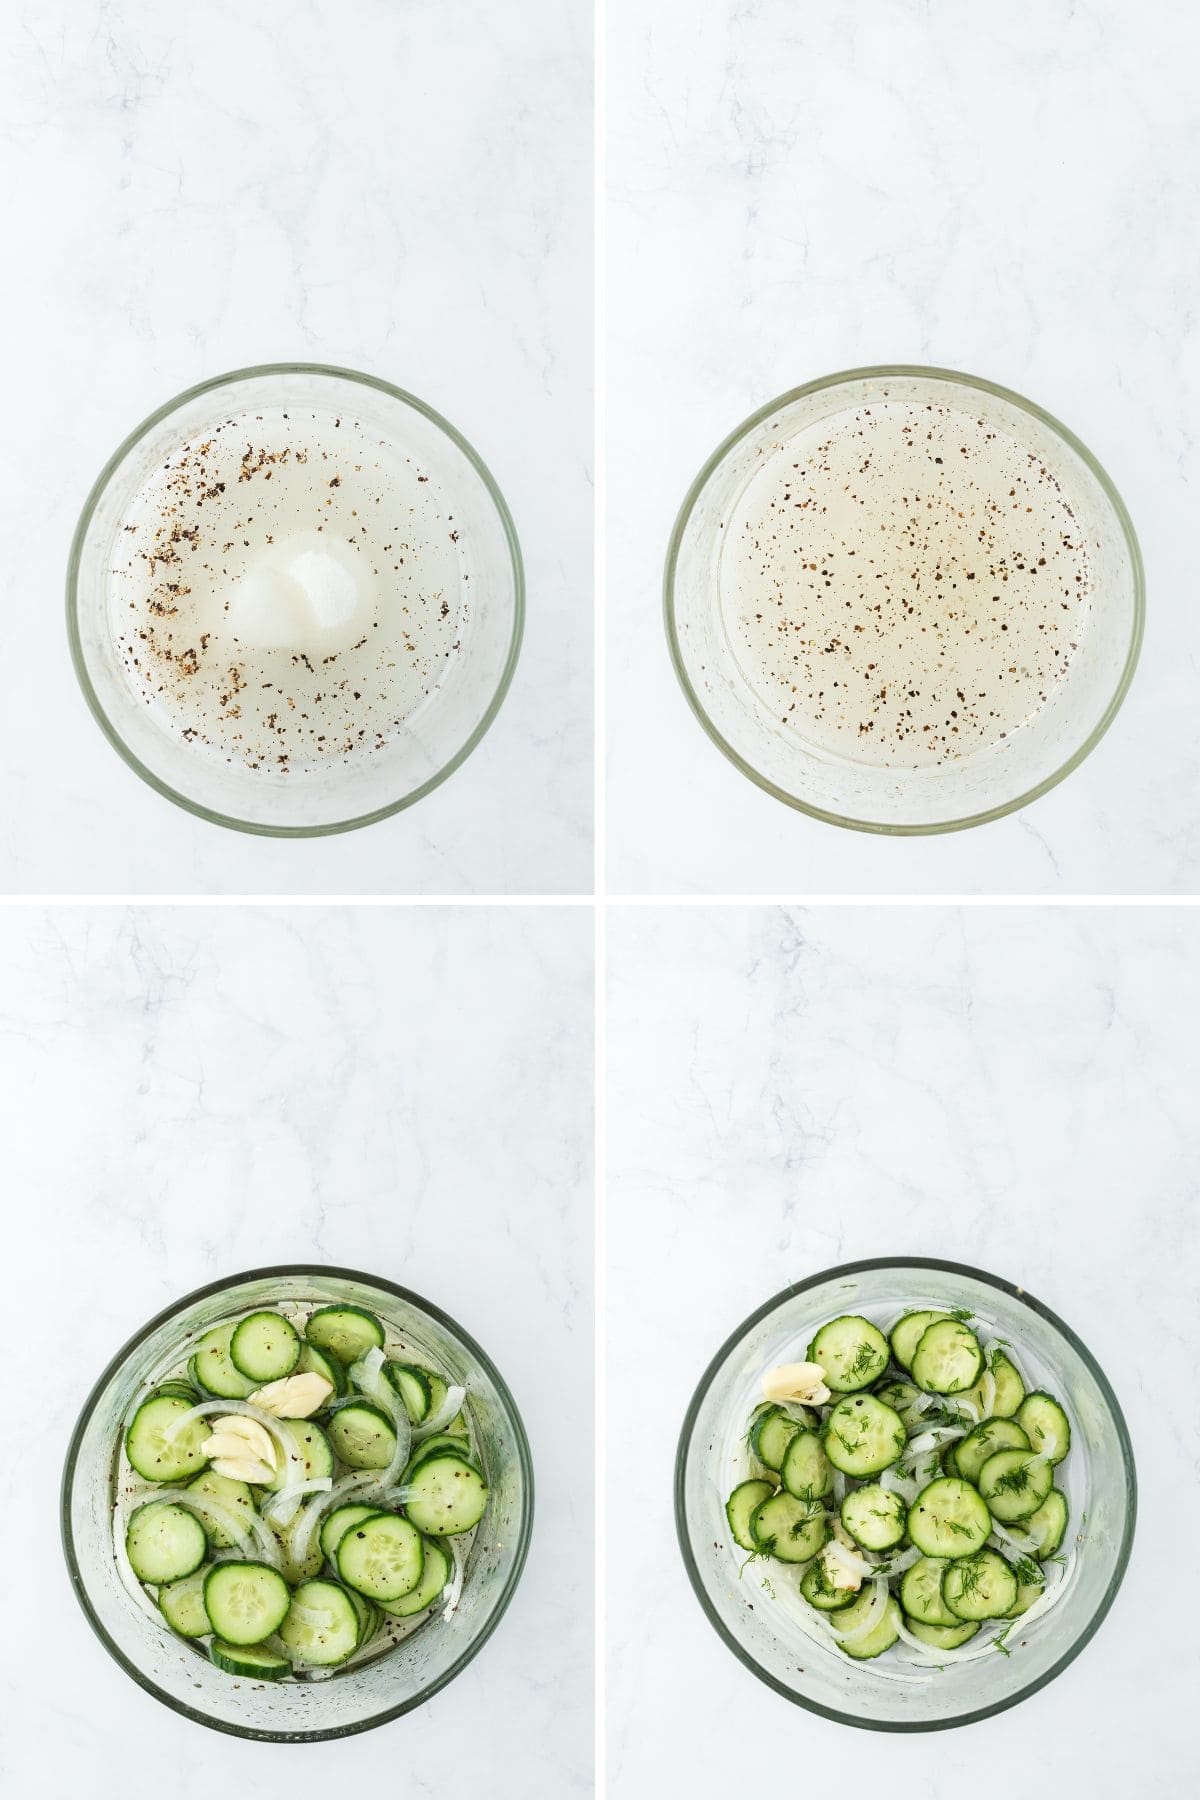 A step by step image collage on how to make cucumber and onion salad with mixing the soaking ingredients, adding the cucumber slices and onions, and draining the salad